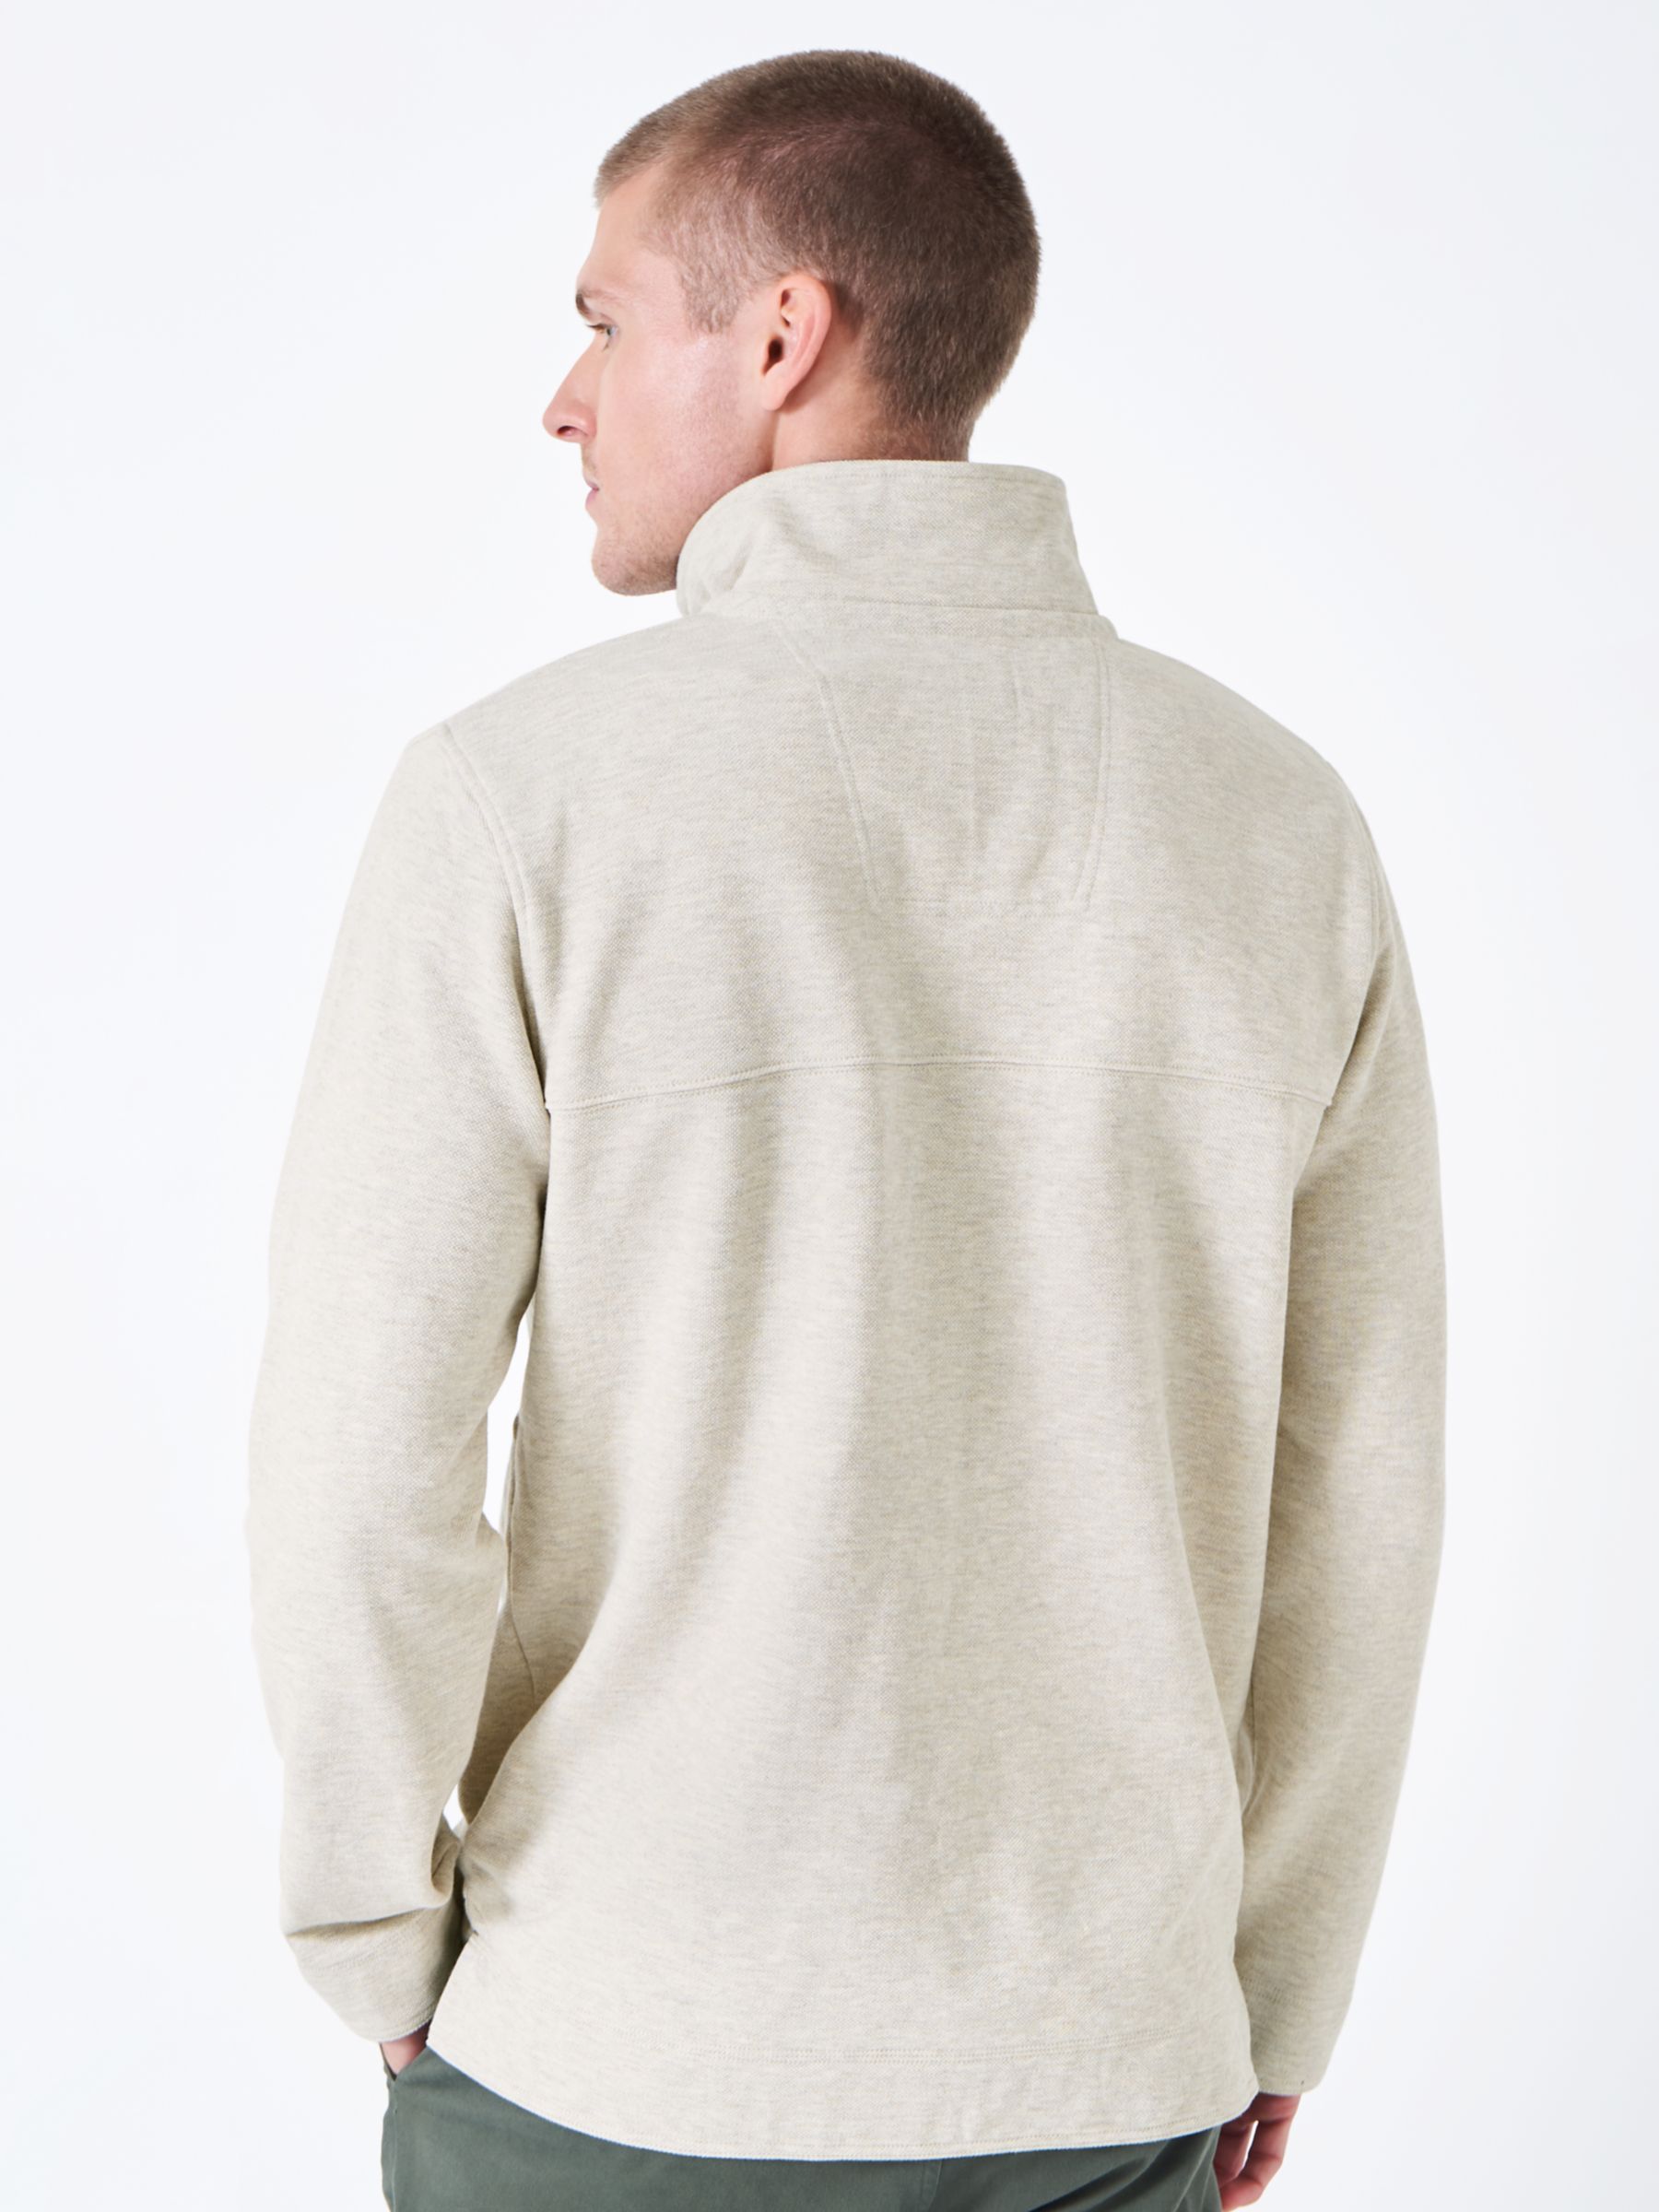 Buy Crew Clothing Padstow Pique Jumper Online at johnlewis.com